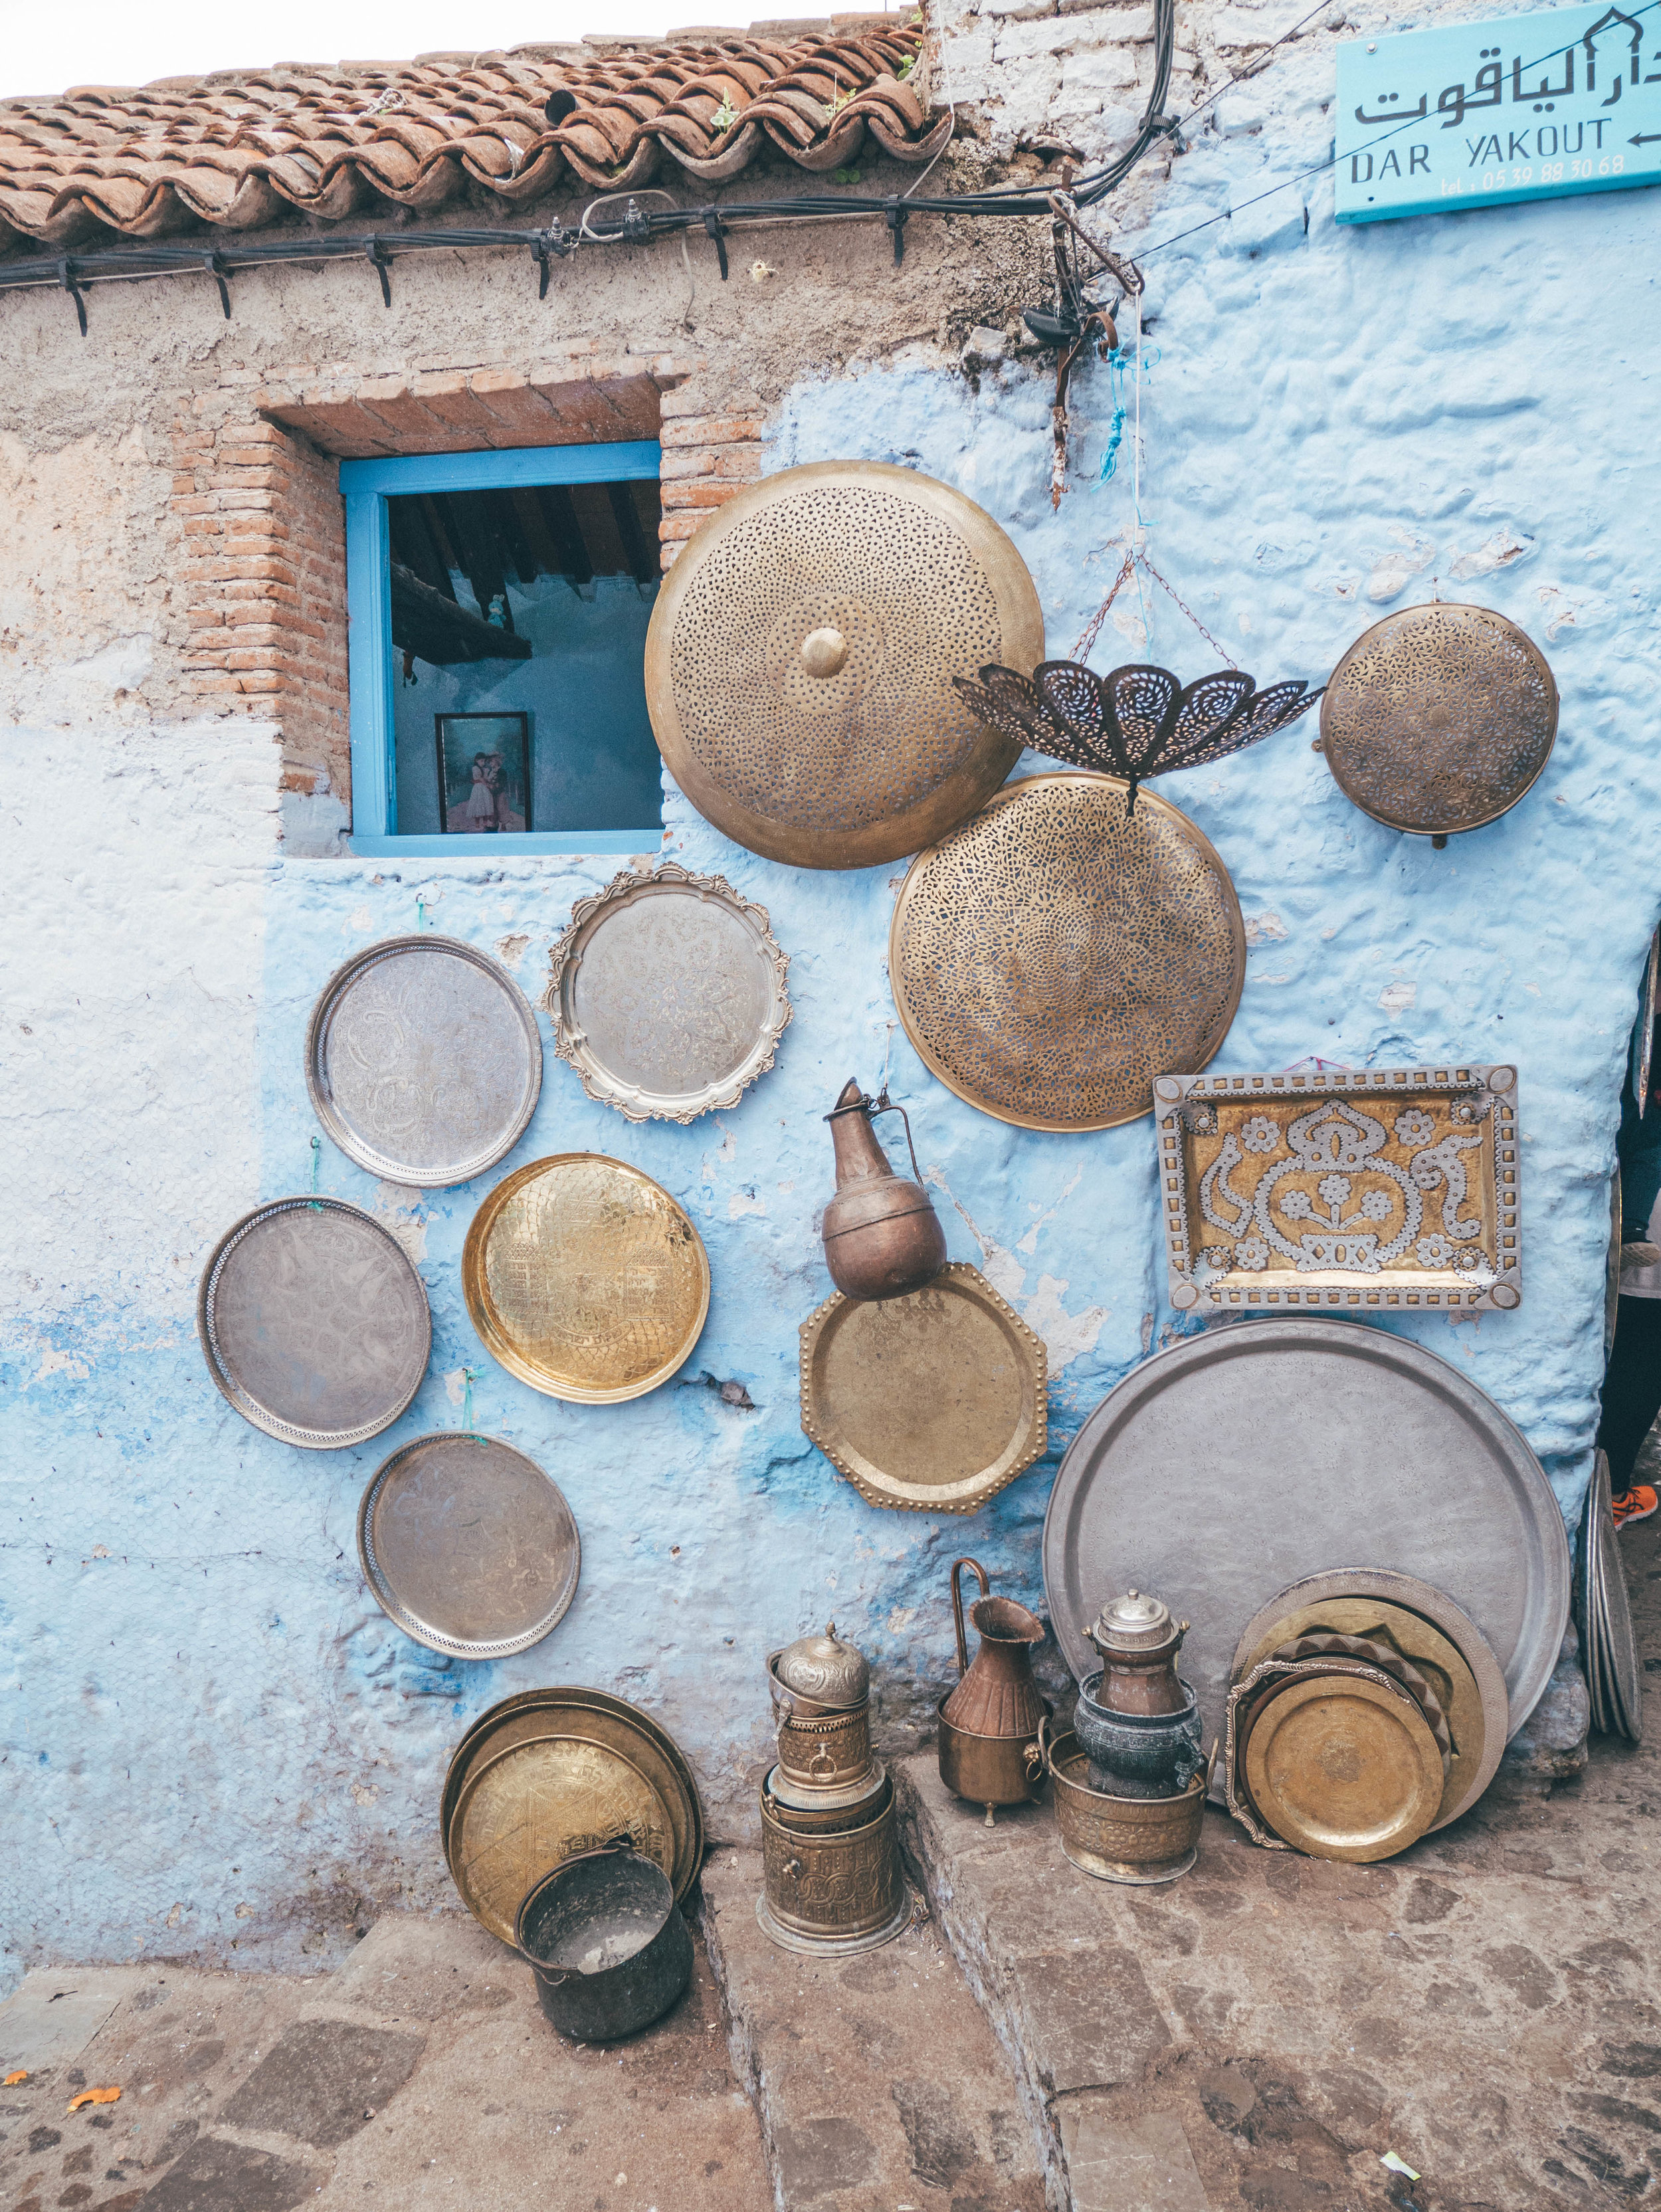 Silver plates on a blue house wall - Chefchaouen - Morocco